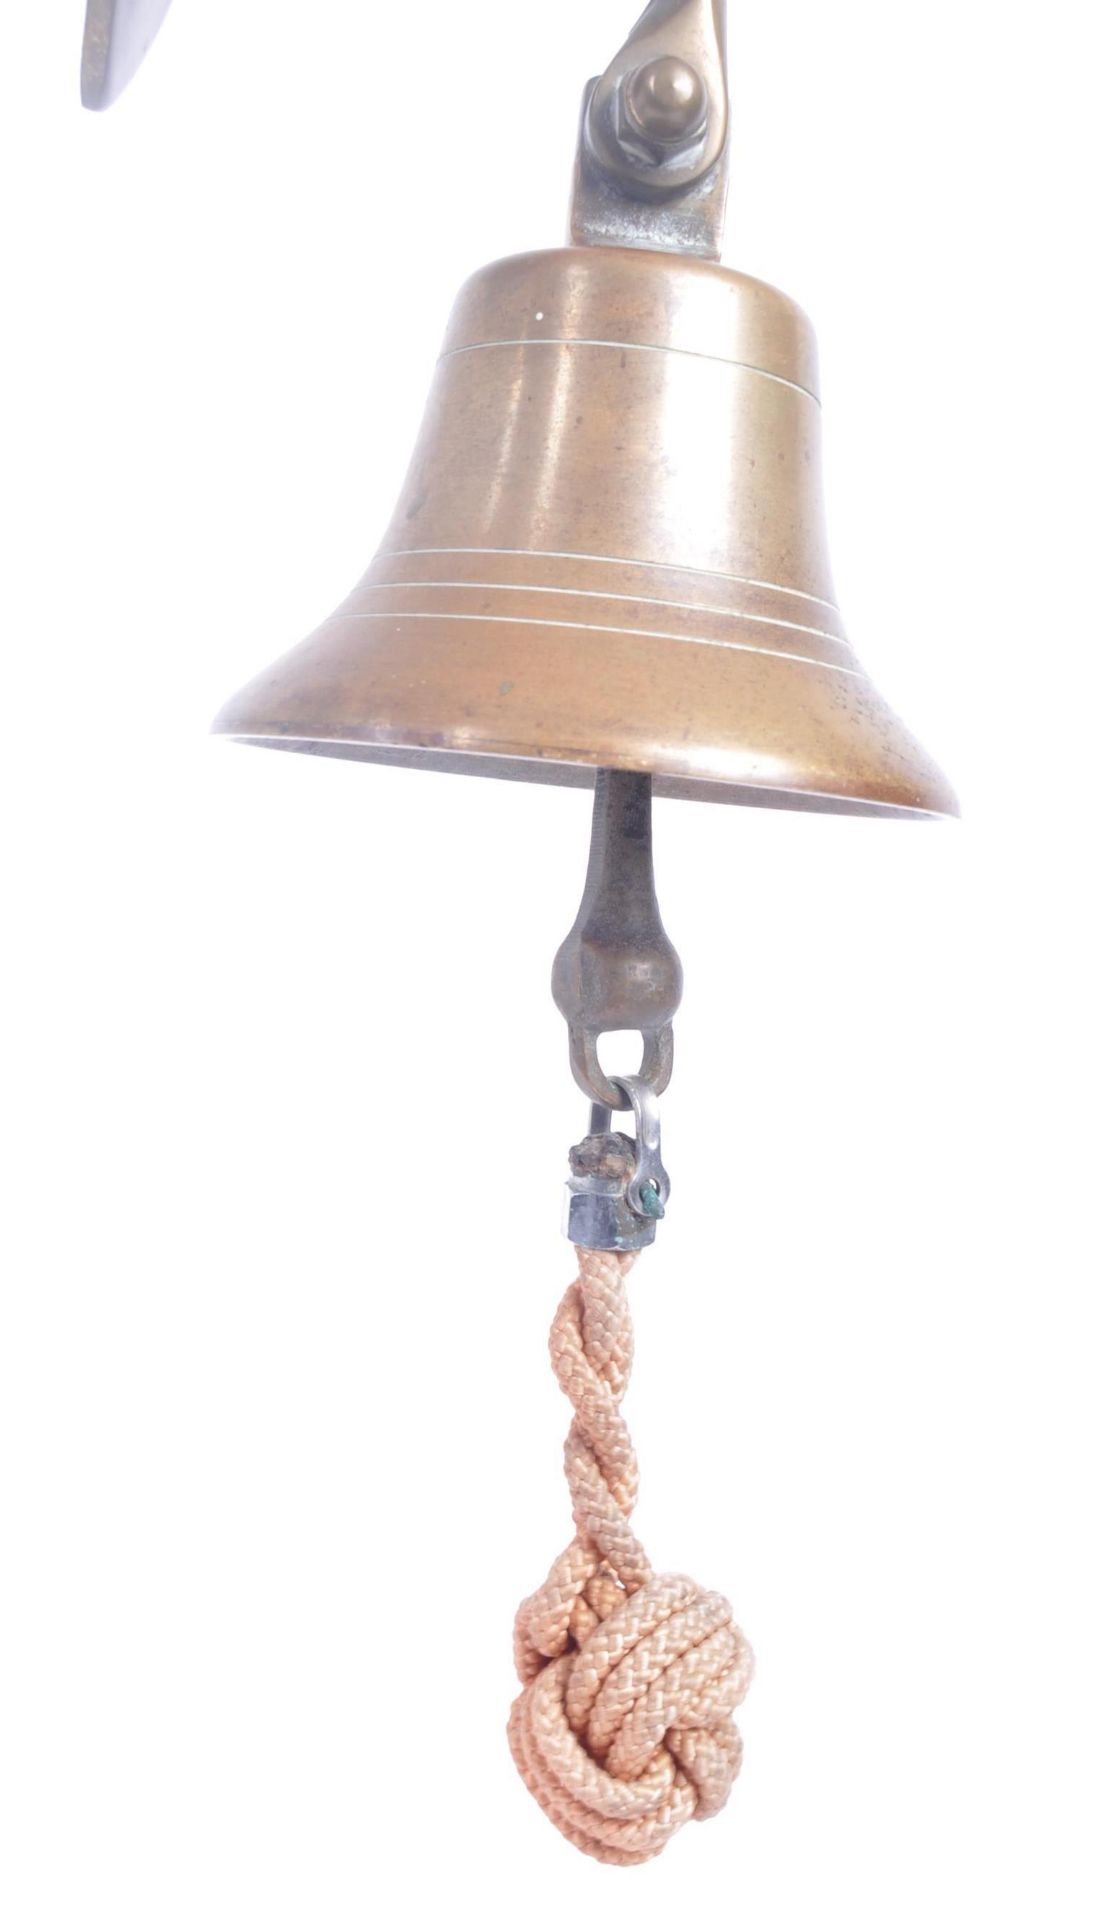 EARLY 20TH CENTURY WWI ERA BRONZE SHIPS BELL - Image 7 of 7